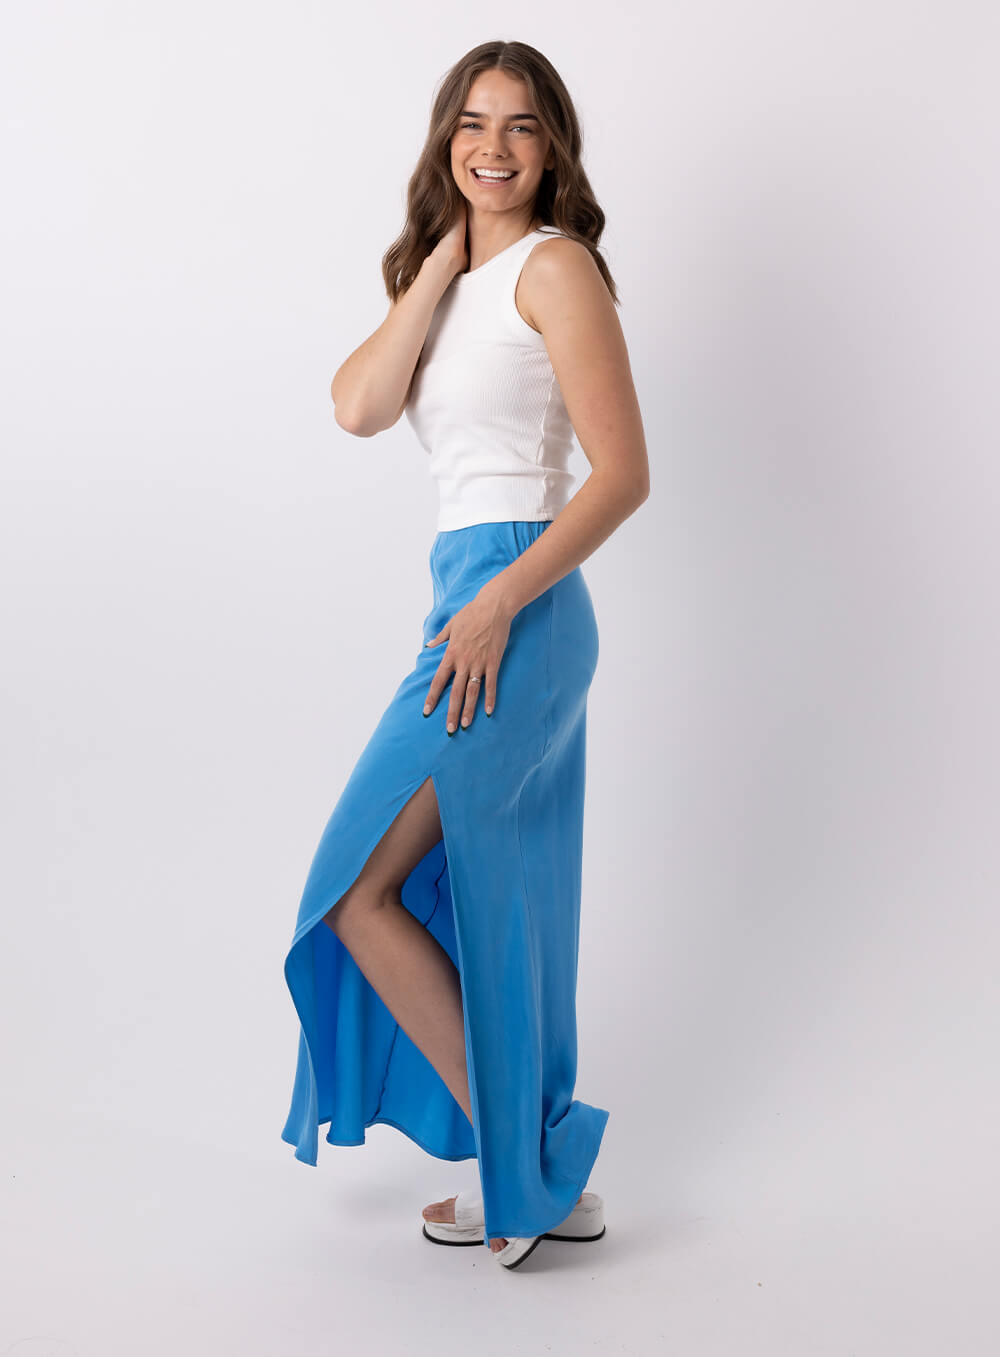 The Allira Cupro skirt is made from a soft feel cupro fabric and features a side split, side rouched panel to create a draping effect through the hip and is a full length skirt